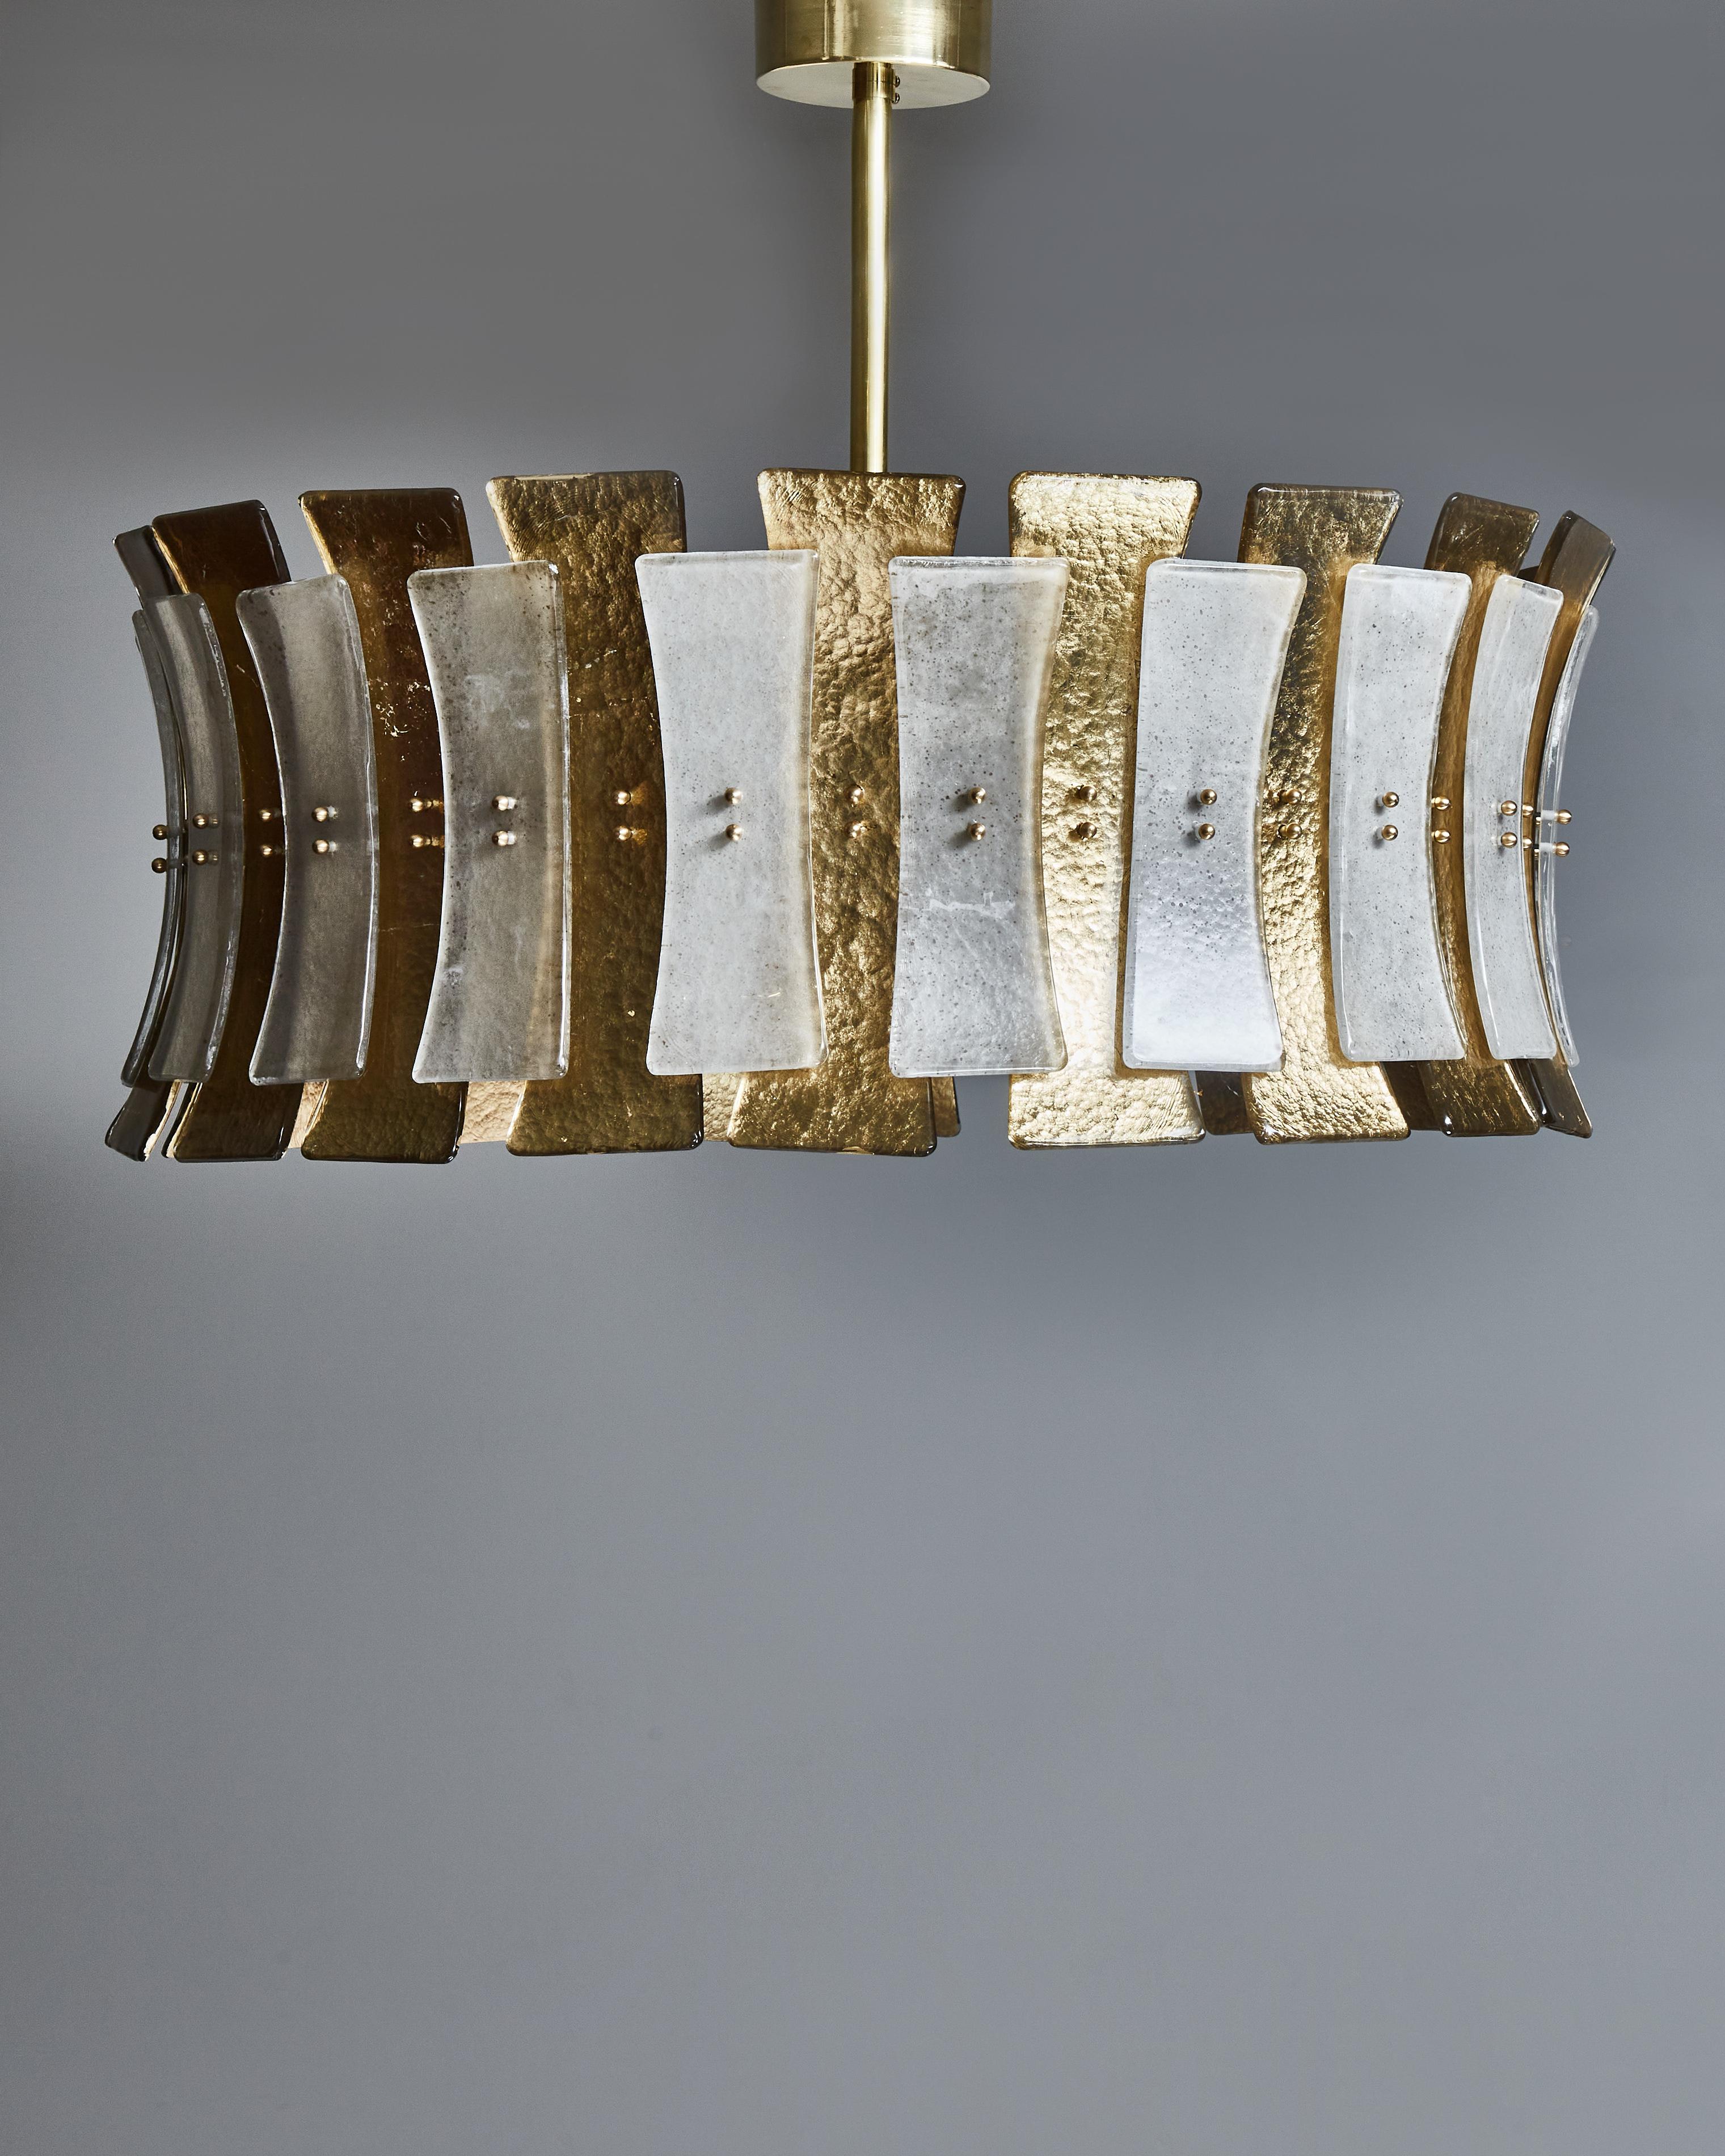 Round drum shaped chandelier with Murano glass panels all around, alternating between gold and grey.